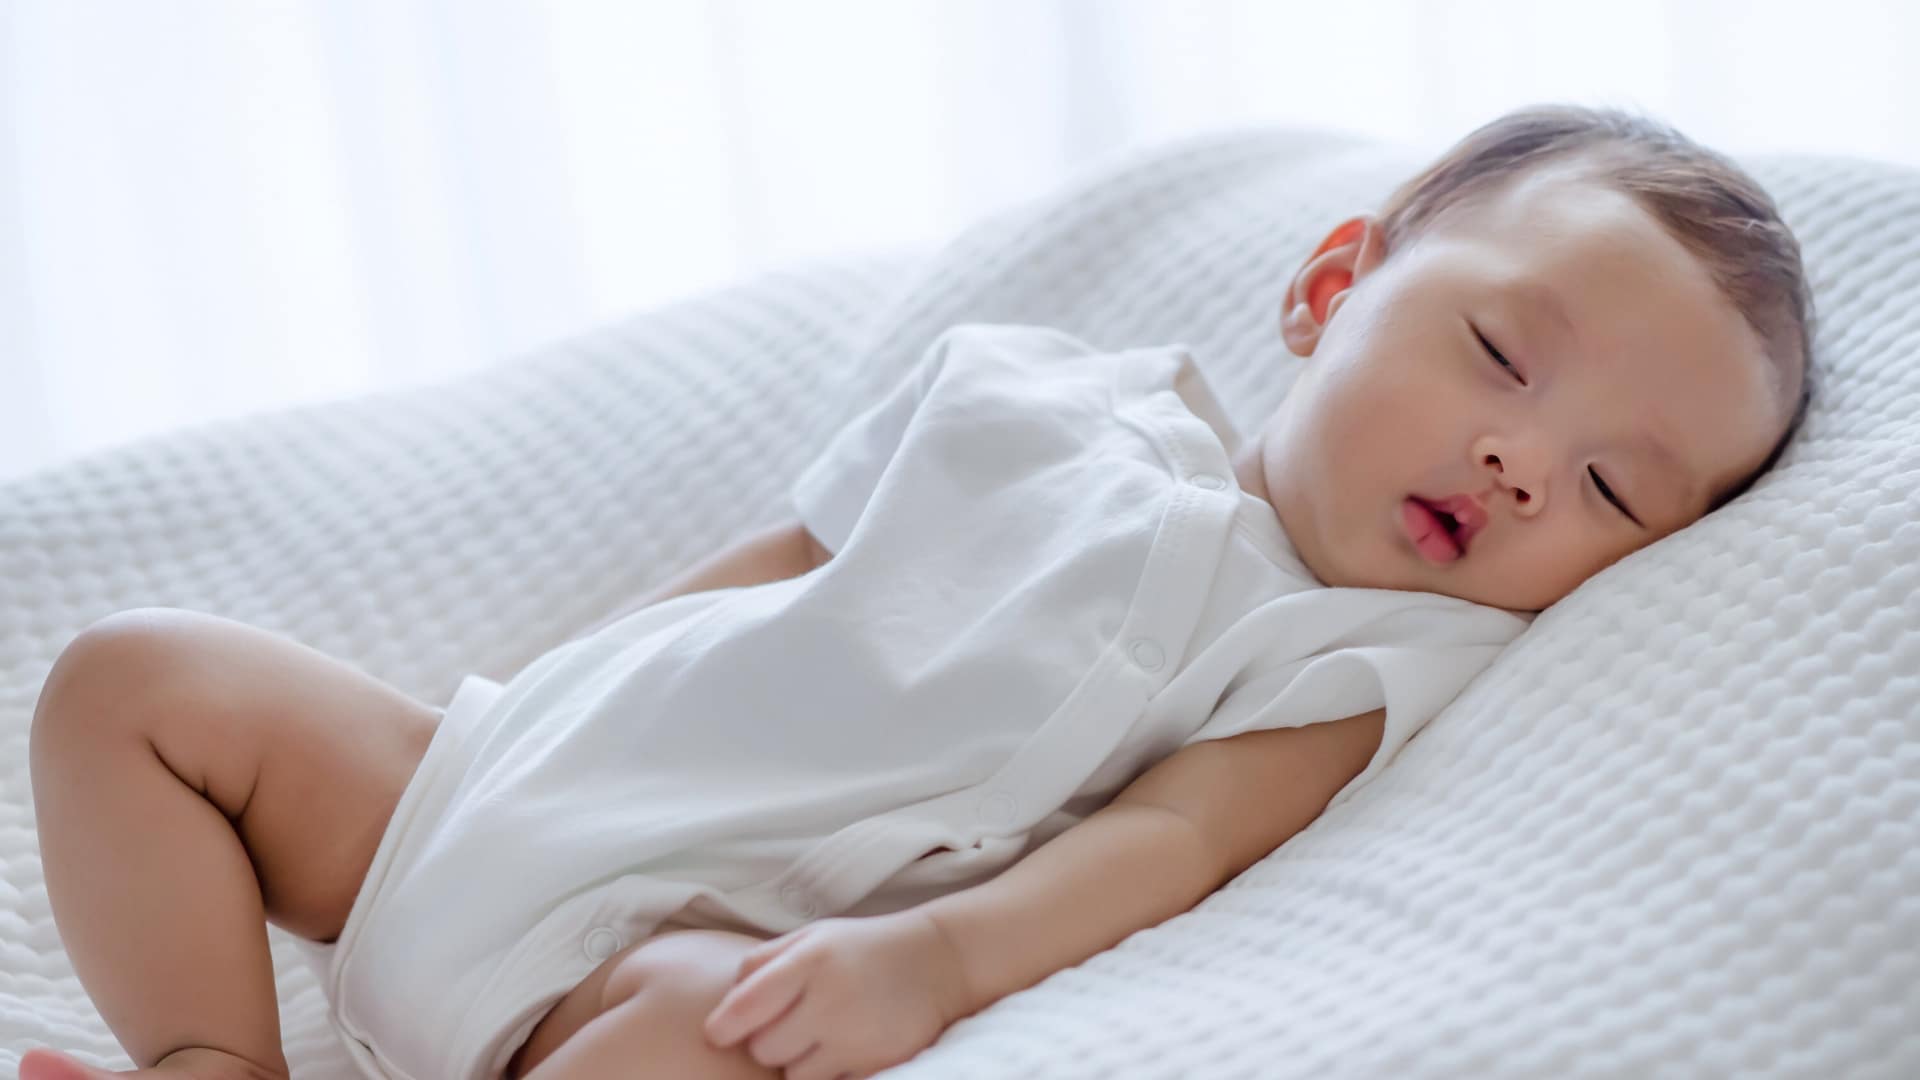 Sleep Training A 3-Month-Old: Here’s The Honest Truth